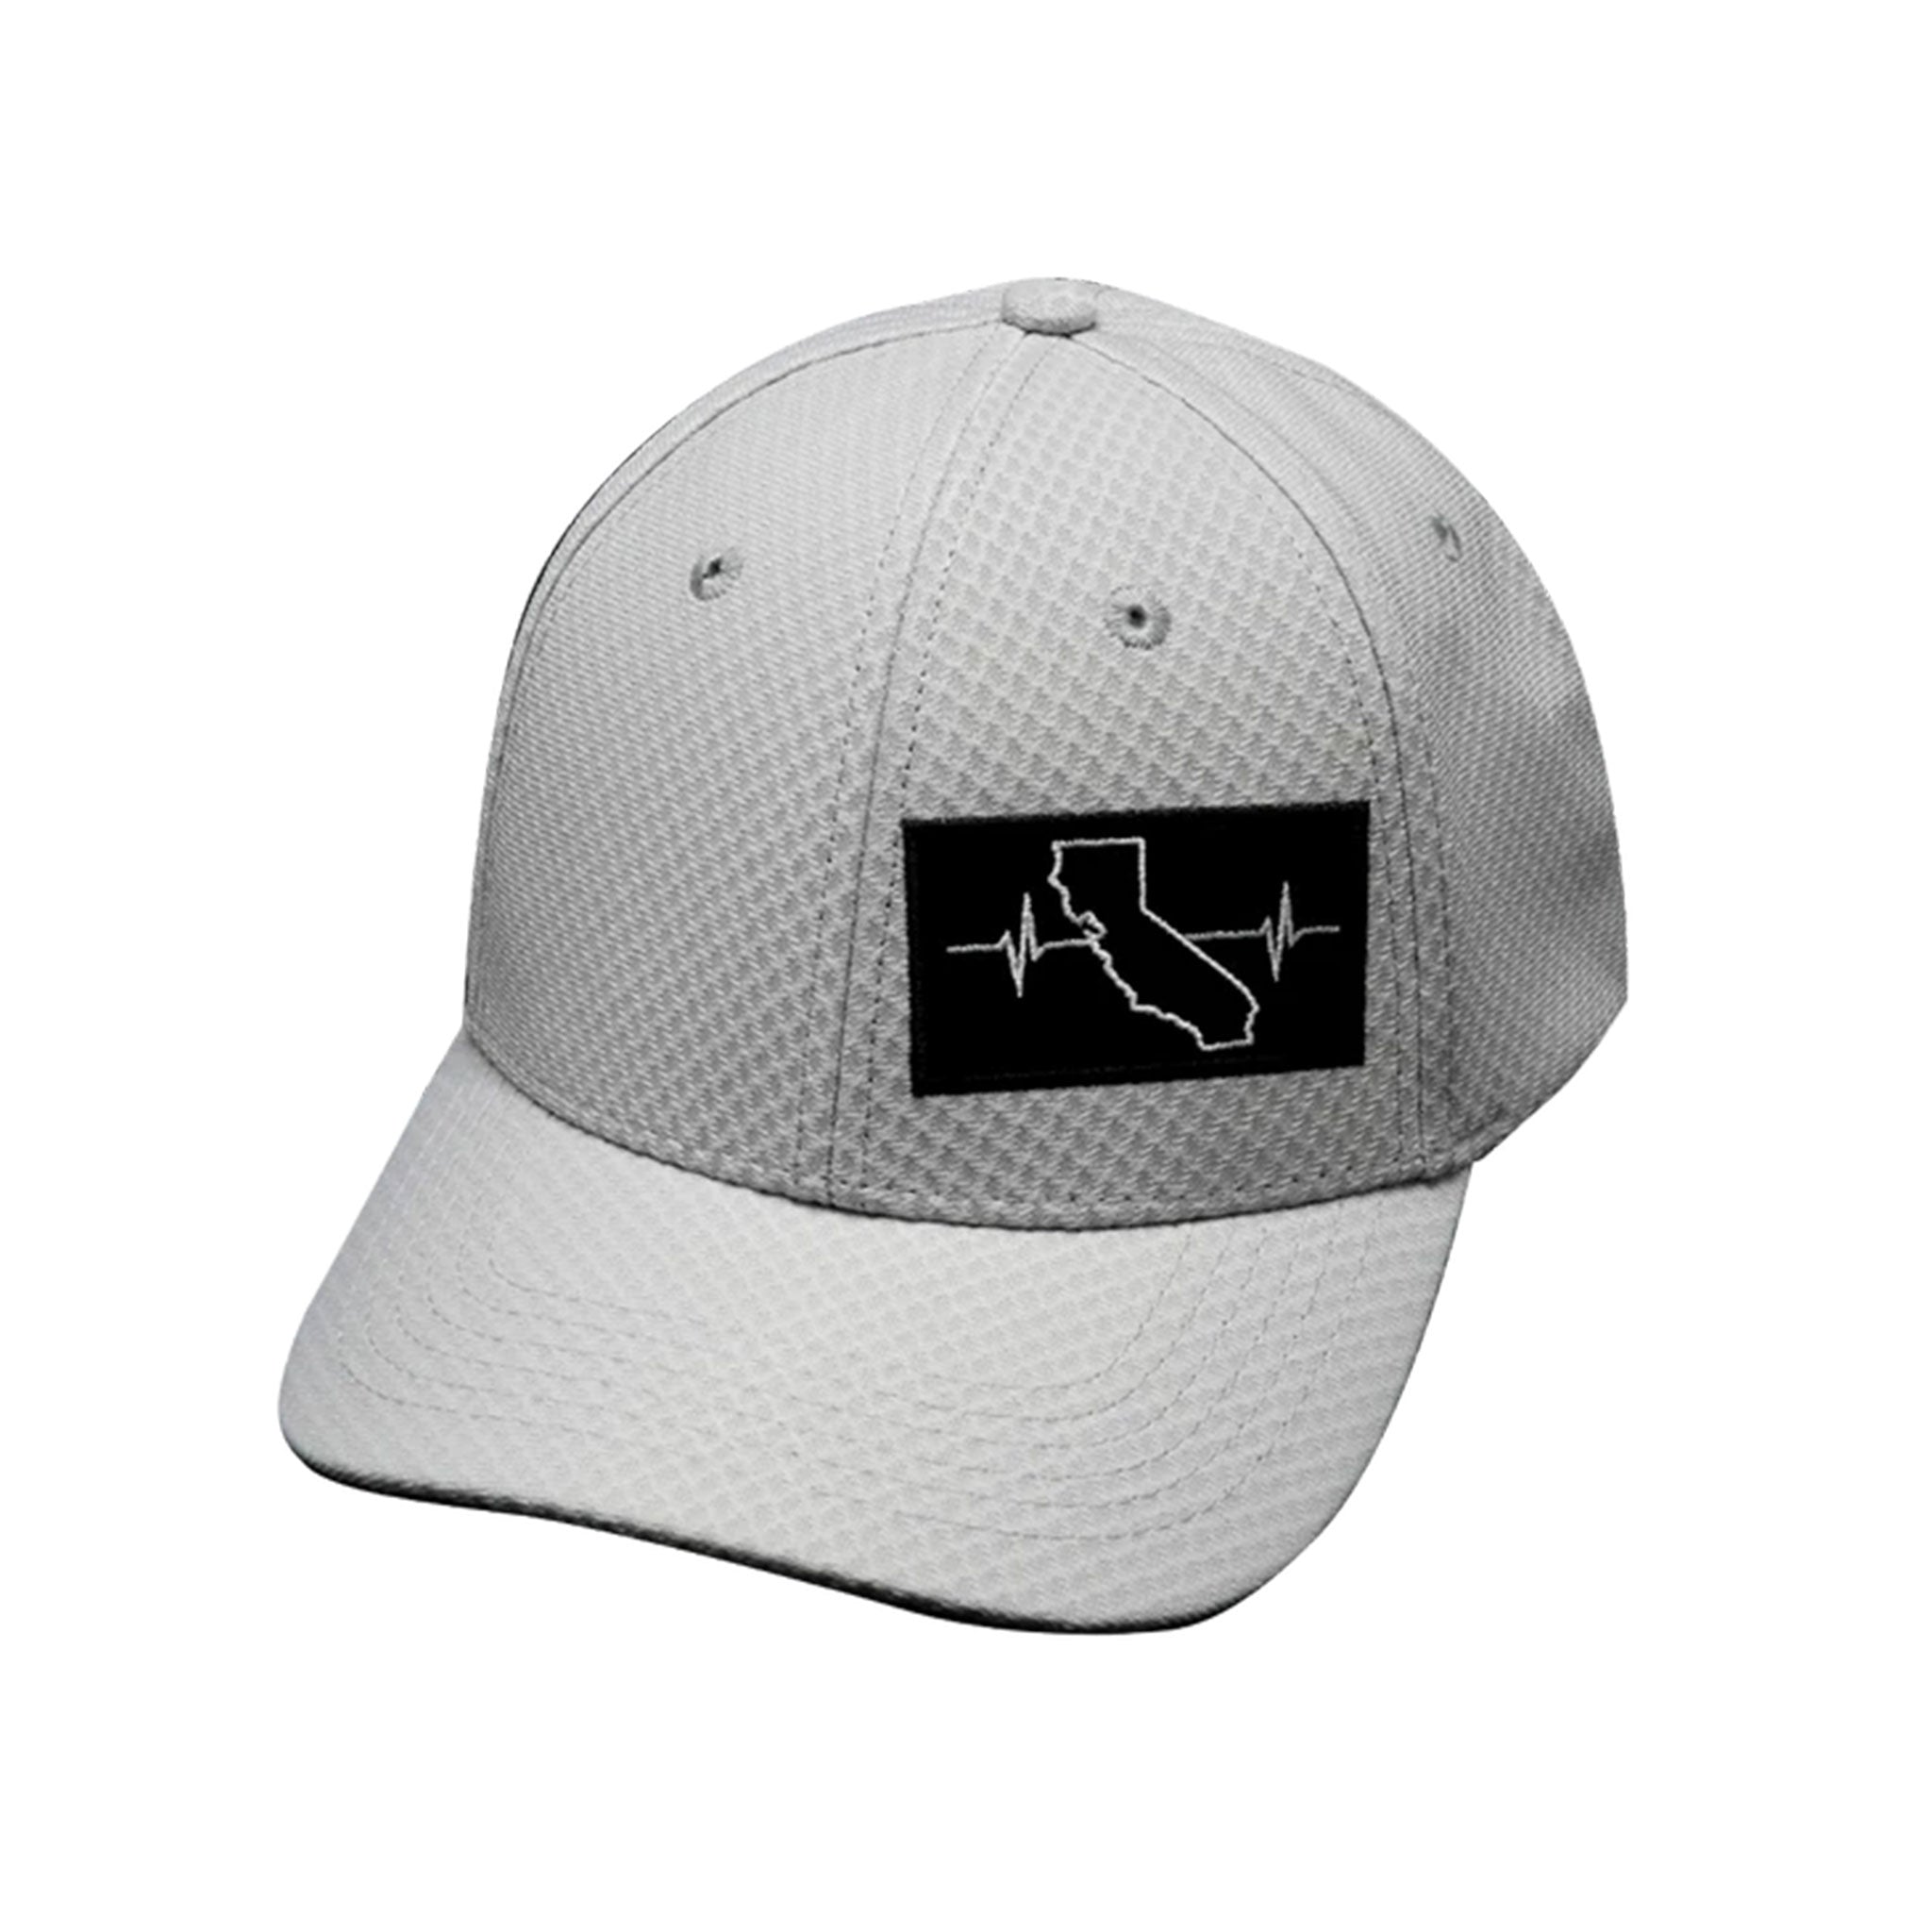 California 6-Panel Air Mesh Athletic Fit Heartbeat Hat (Light Gray)